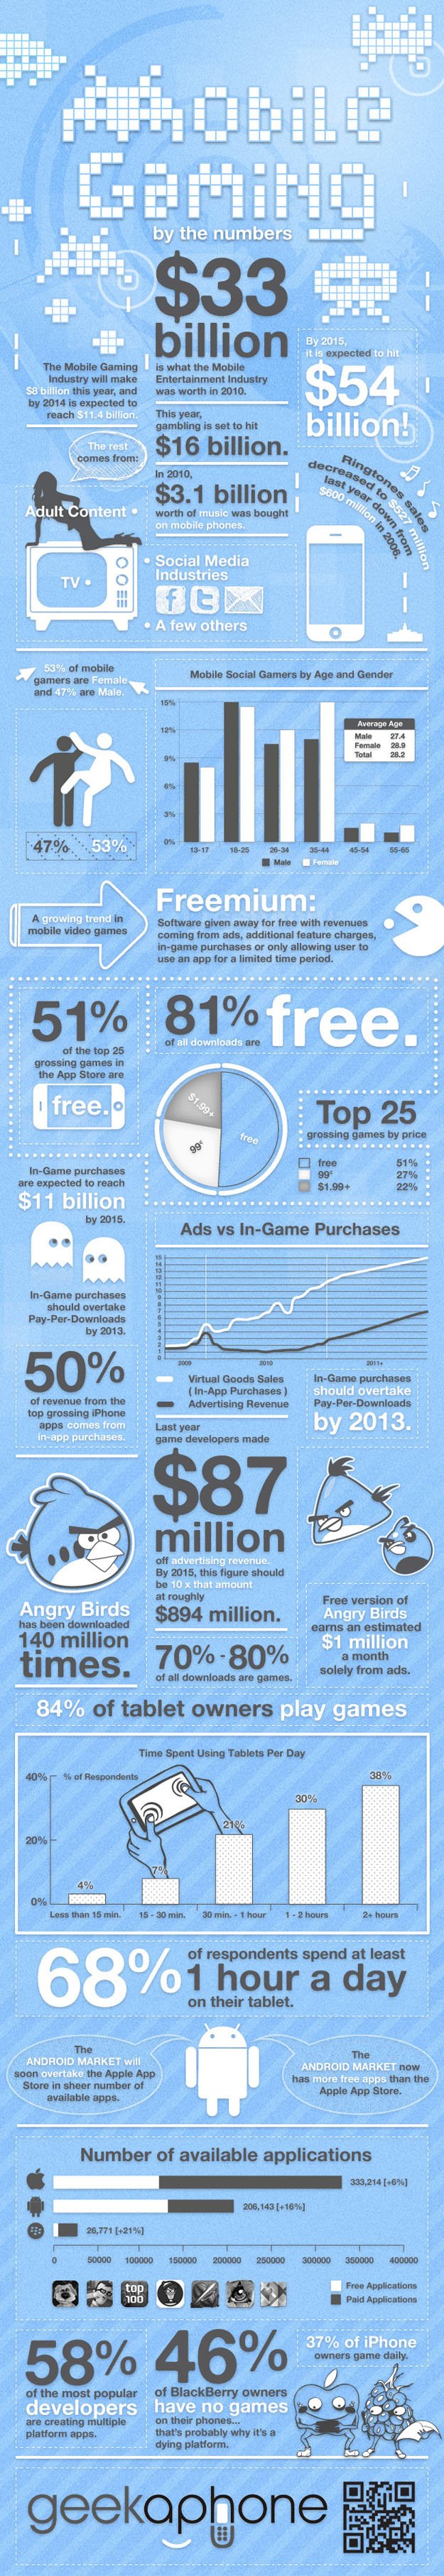 mobile gaming infographic stats